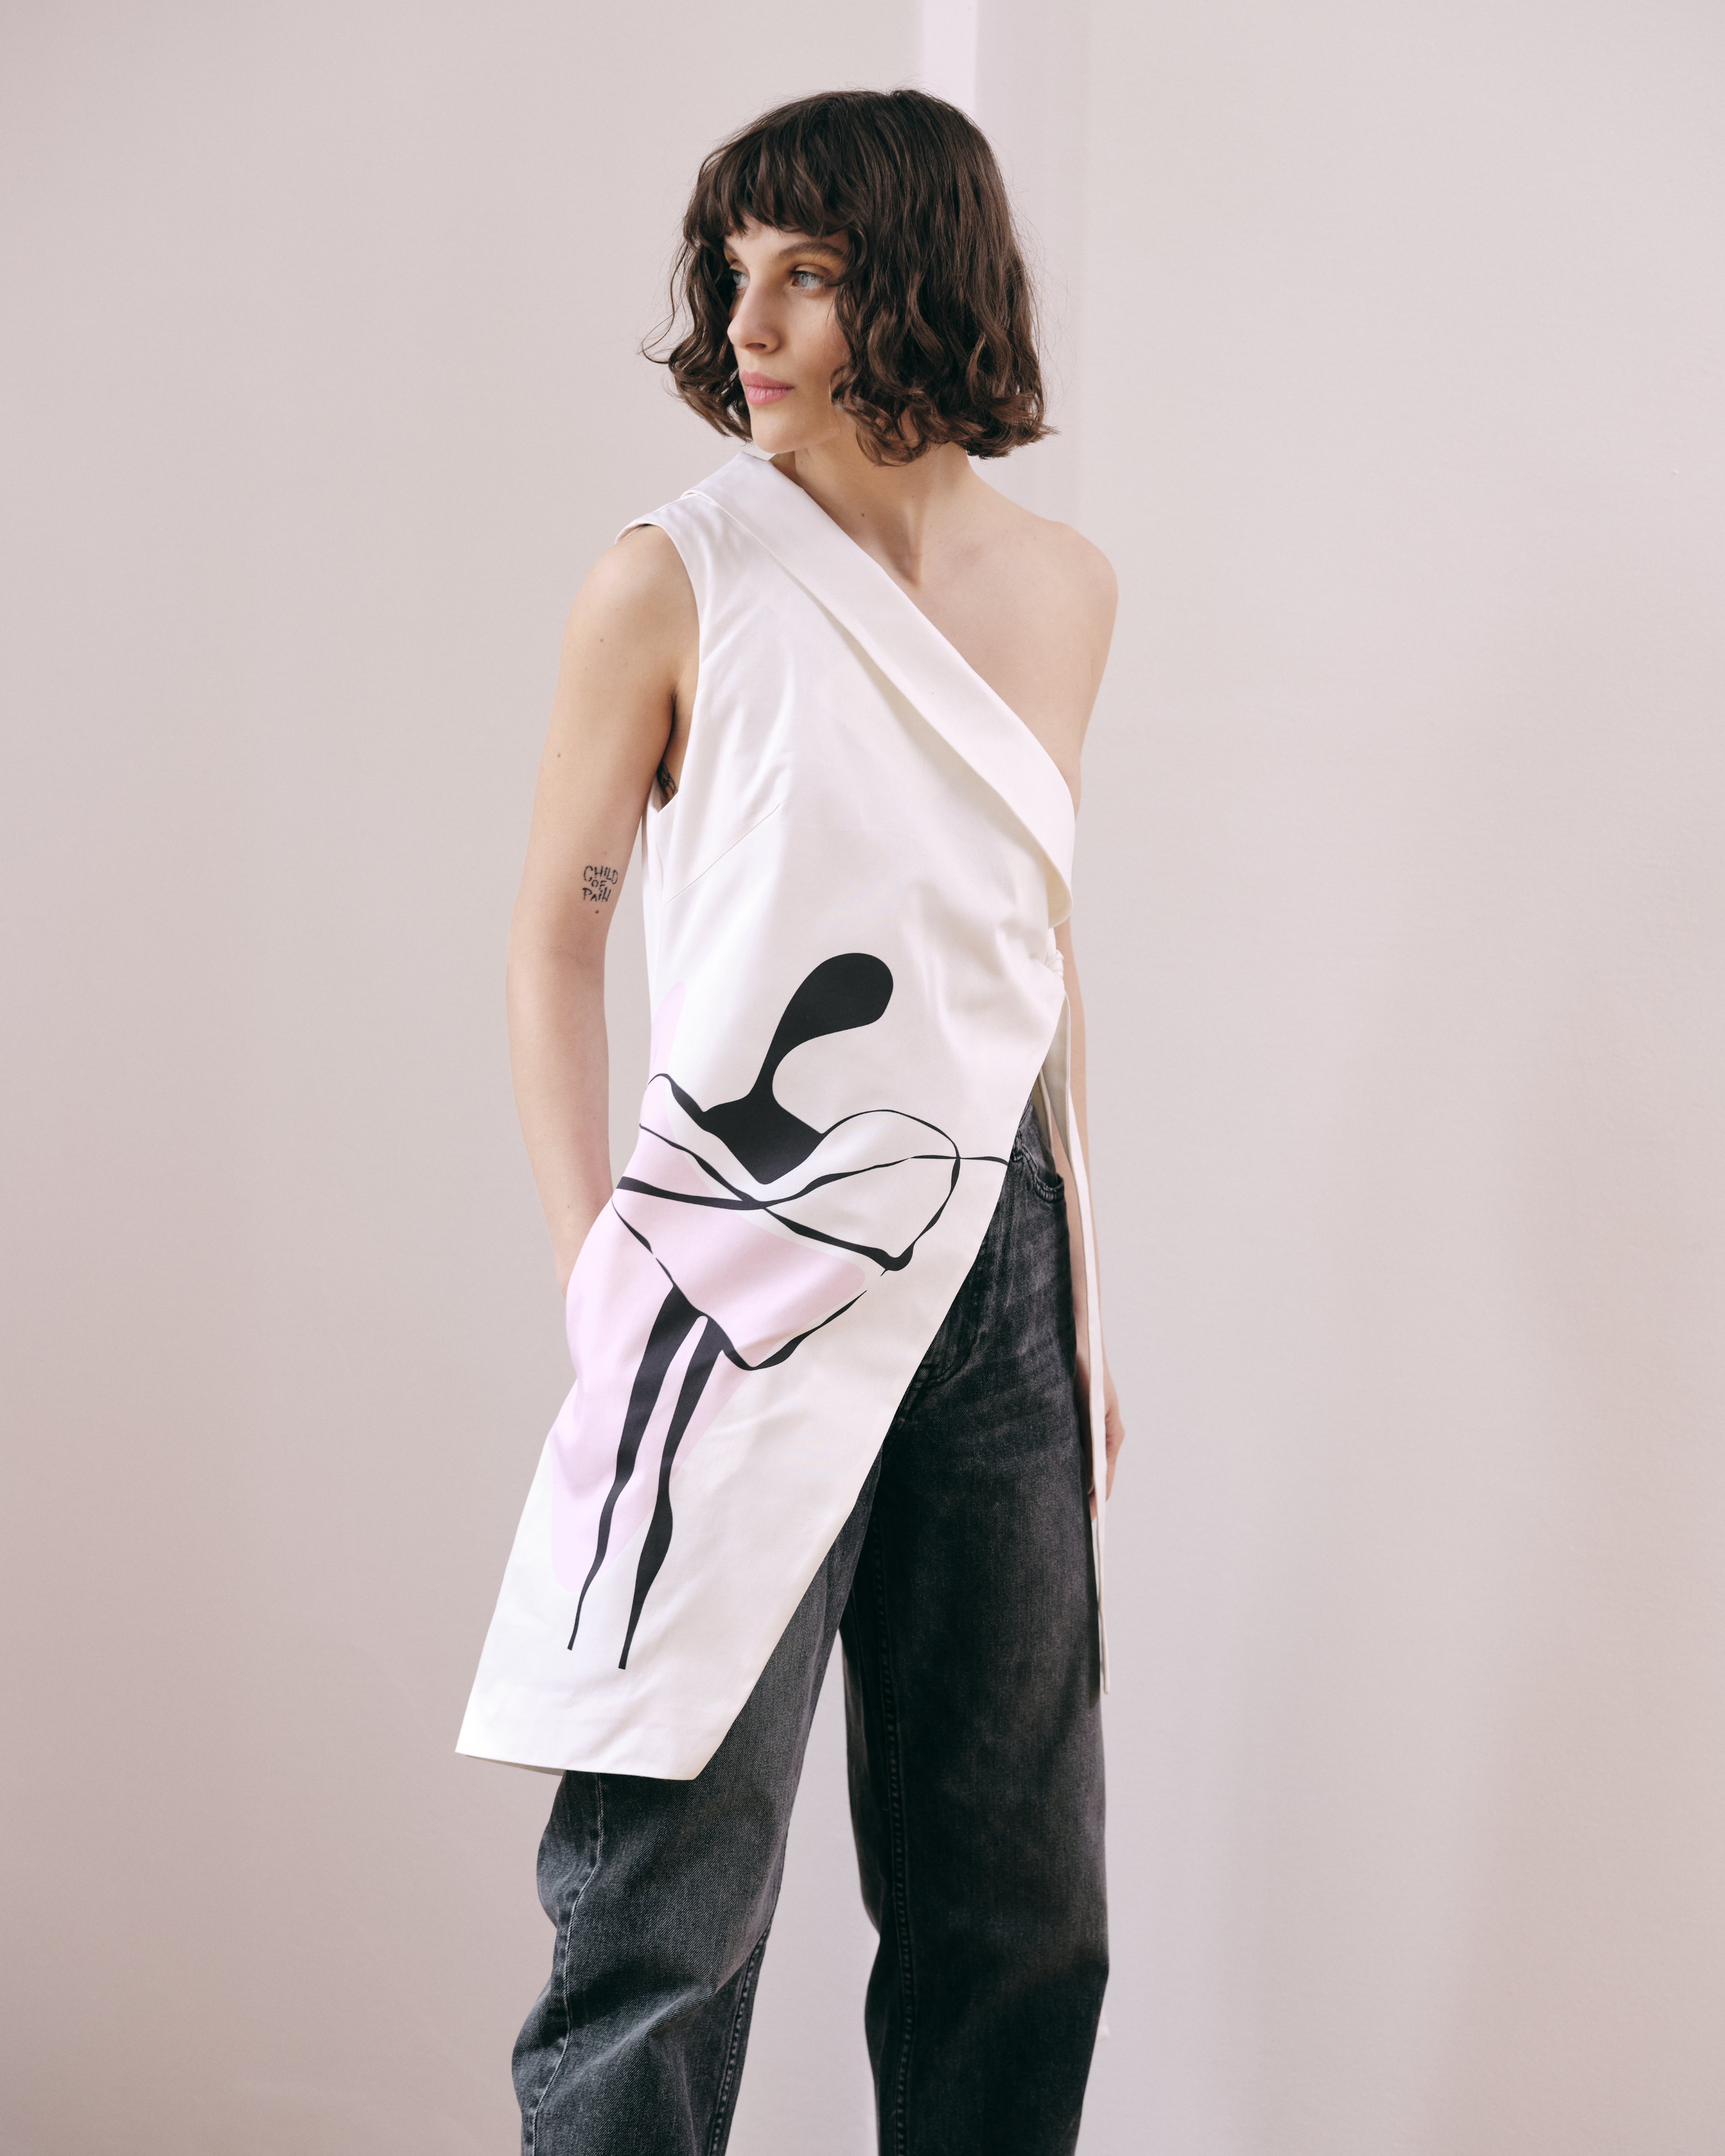 VERSATILE, adjective, able to adapt or be adapted to many different functions or activities.  Asymmetrical vest with side seam pocket on the right side. It features a one-shoulder design and tied on the left side. Illustration drawn by Madalina Marinescu Ford. Made in 100% cotton.